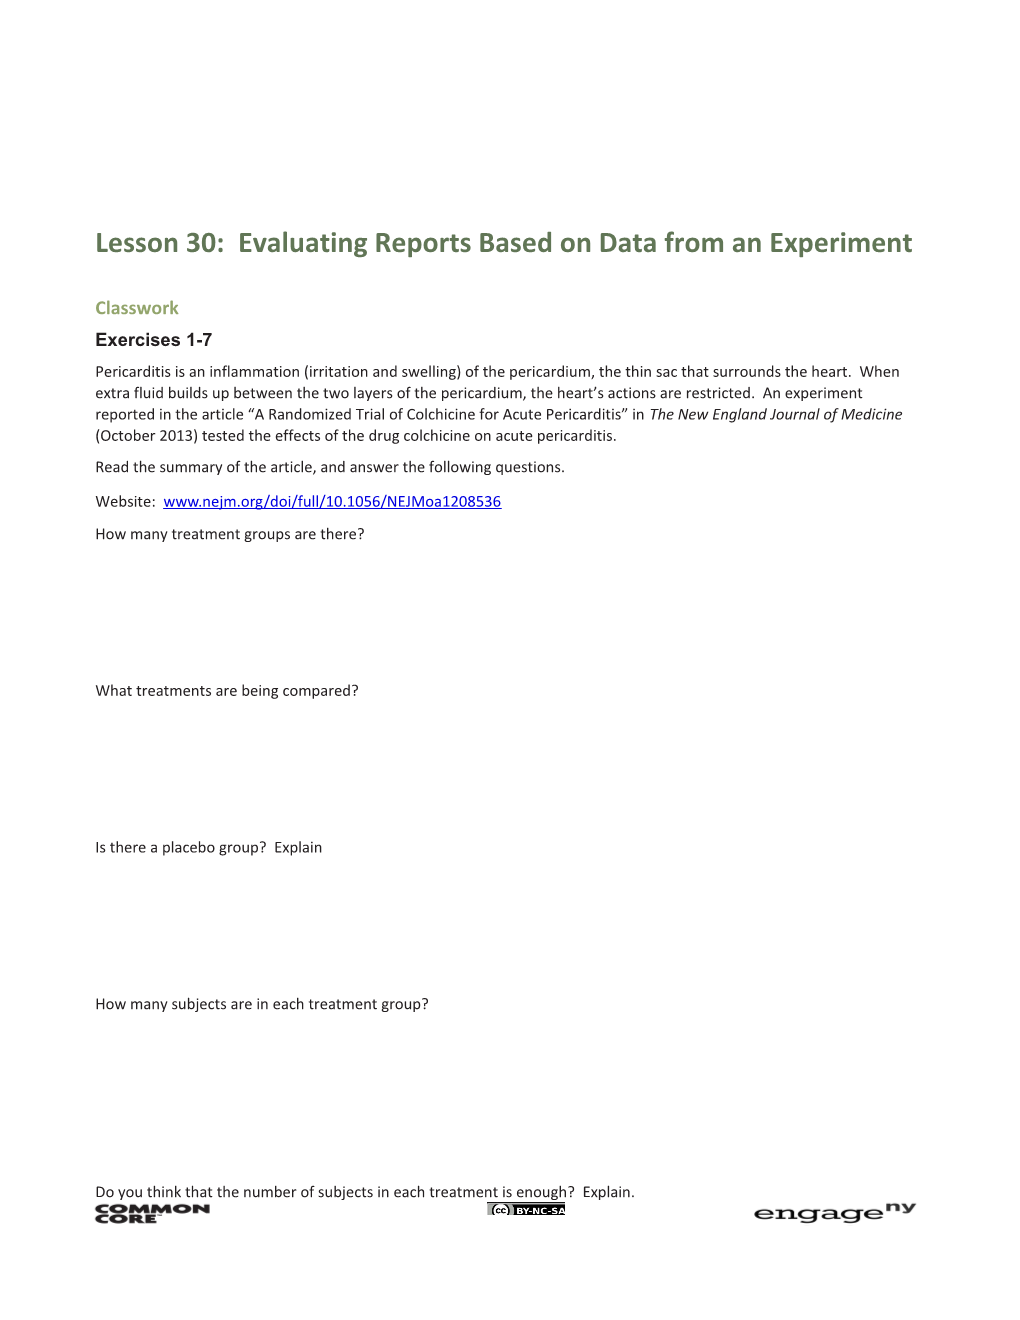 Lesson 30: Evaluating Reports Based on Data from an Experiment